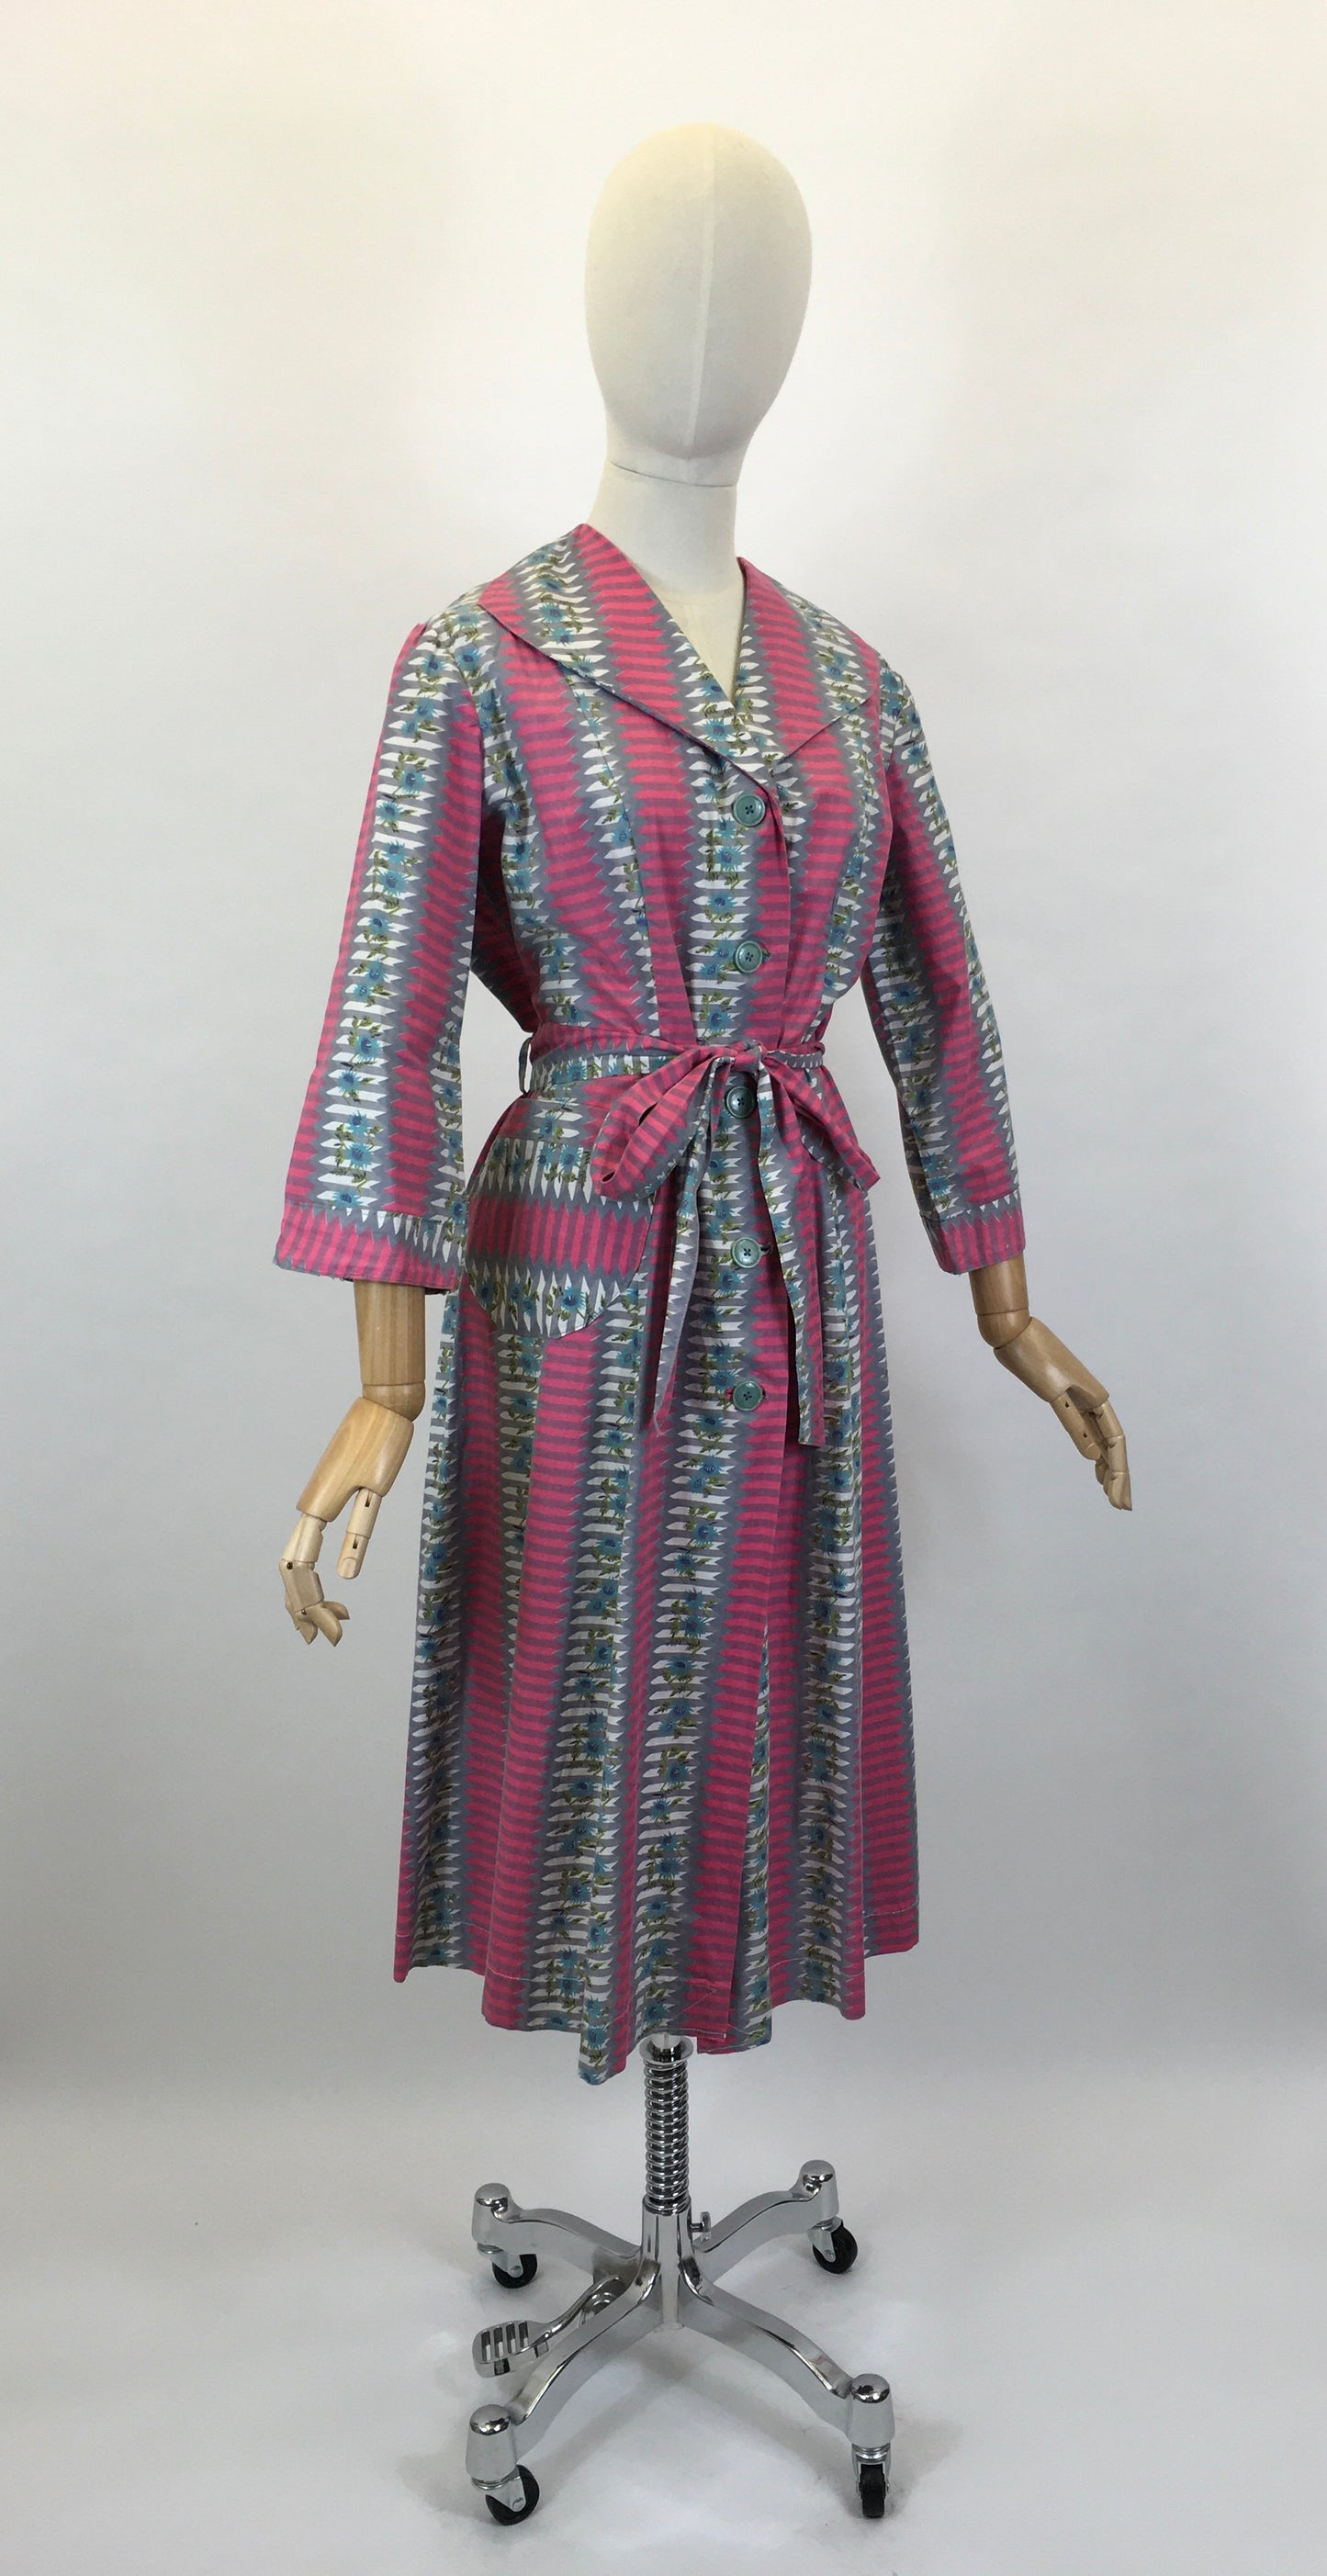 Original 1950’s Pretty Cotton Day Dress - In Bright Pinks, Blues & Greys